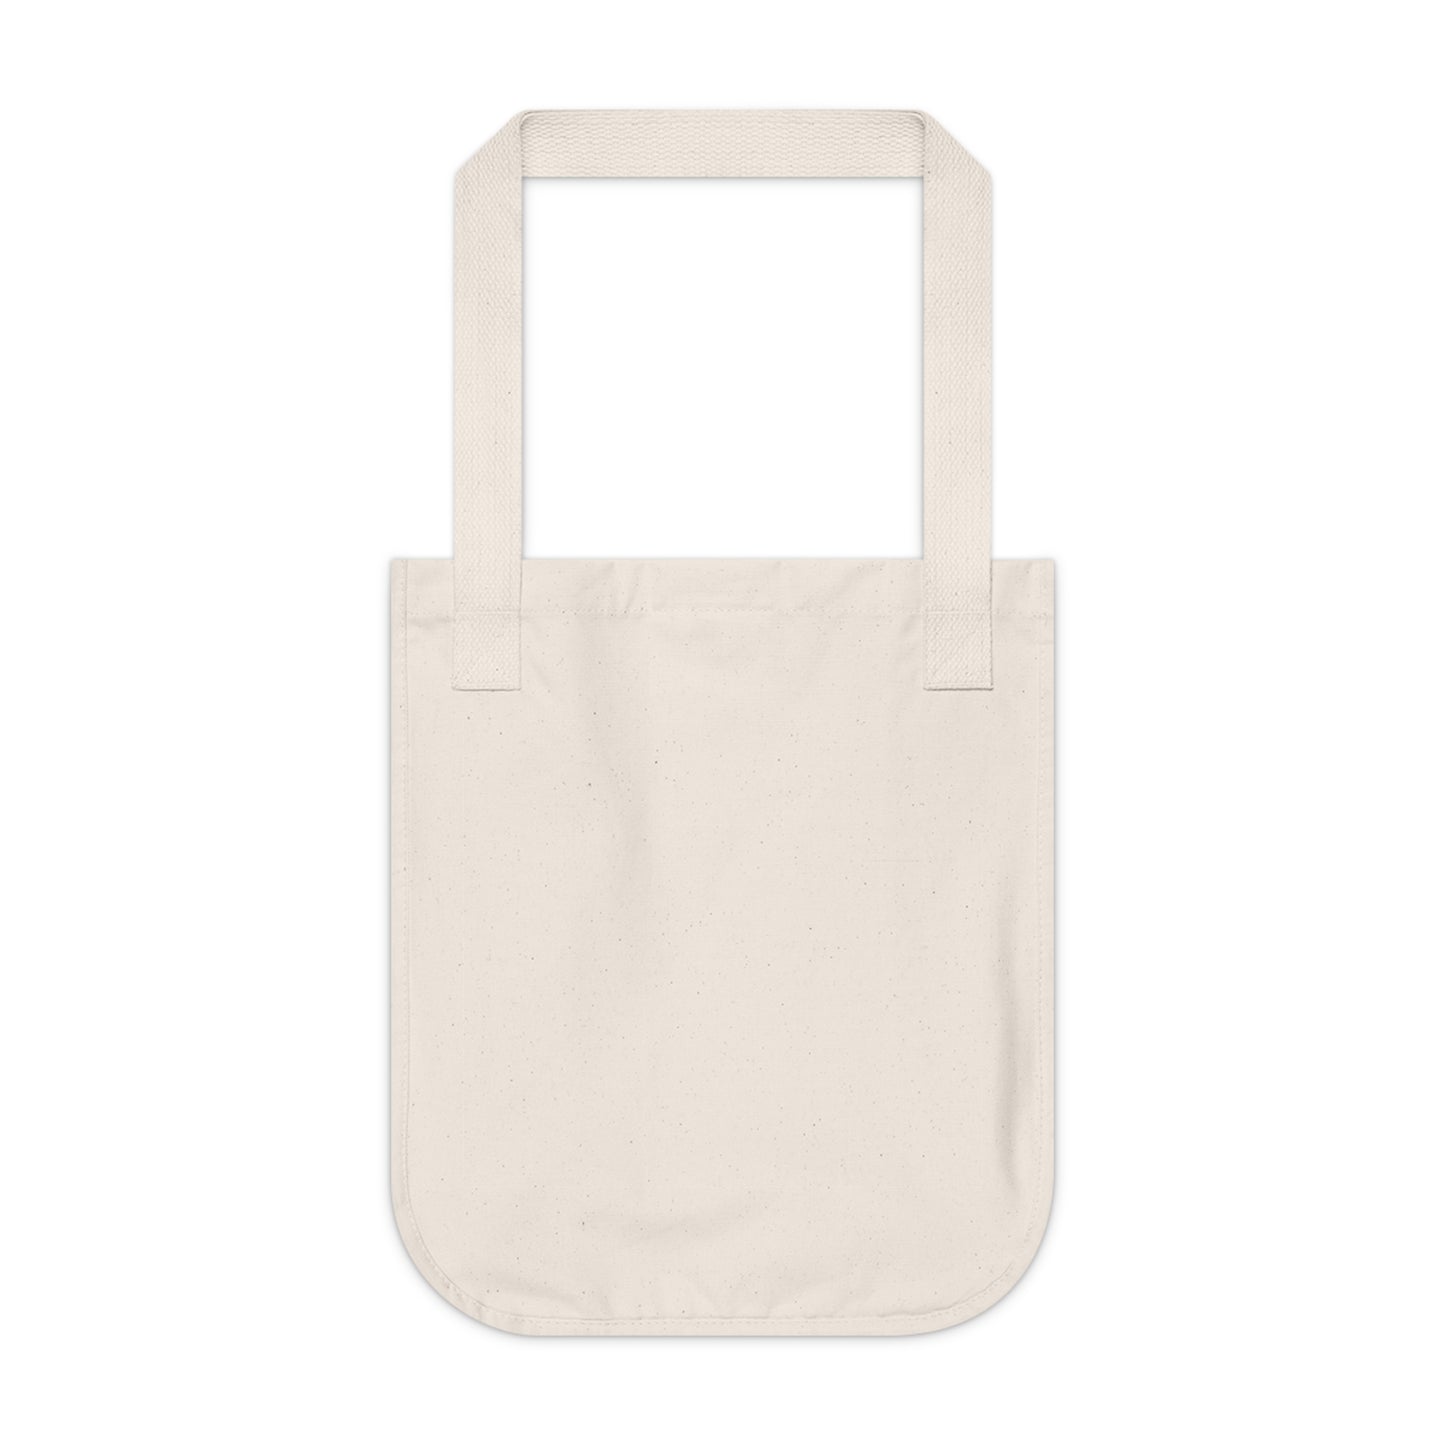 "Natural Reflections: Capturing Life Through Nature" - Bam Boo! Lifestyle Eco-friendly Tote Bag